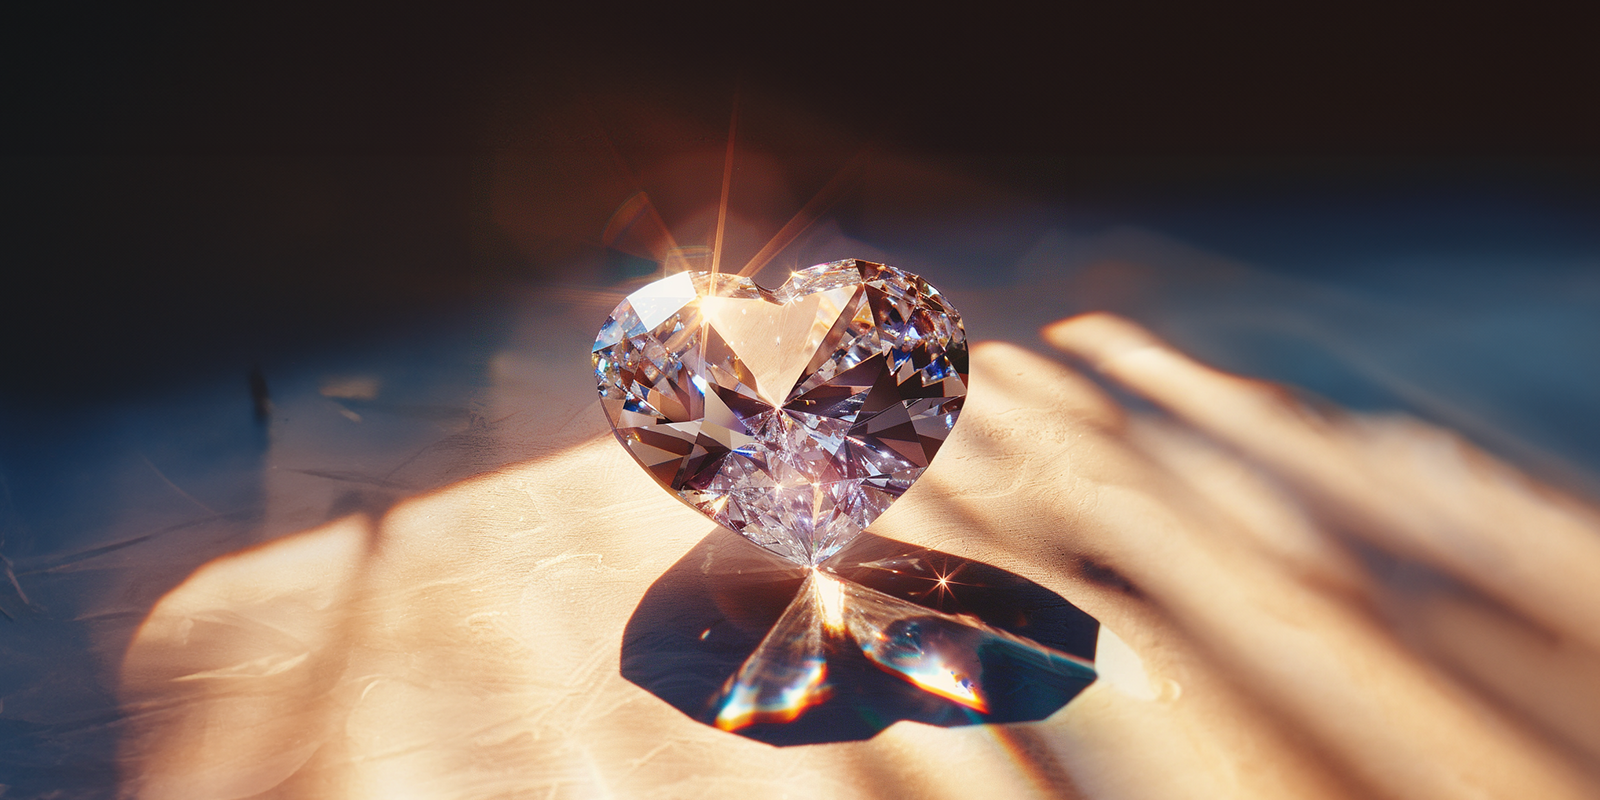 My Jewelry Repair Feature Image "Everything You Need To Know About Heart-Shaped Diamonds"